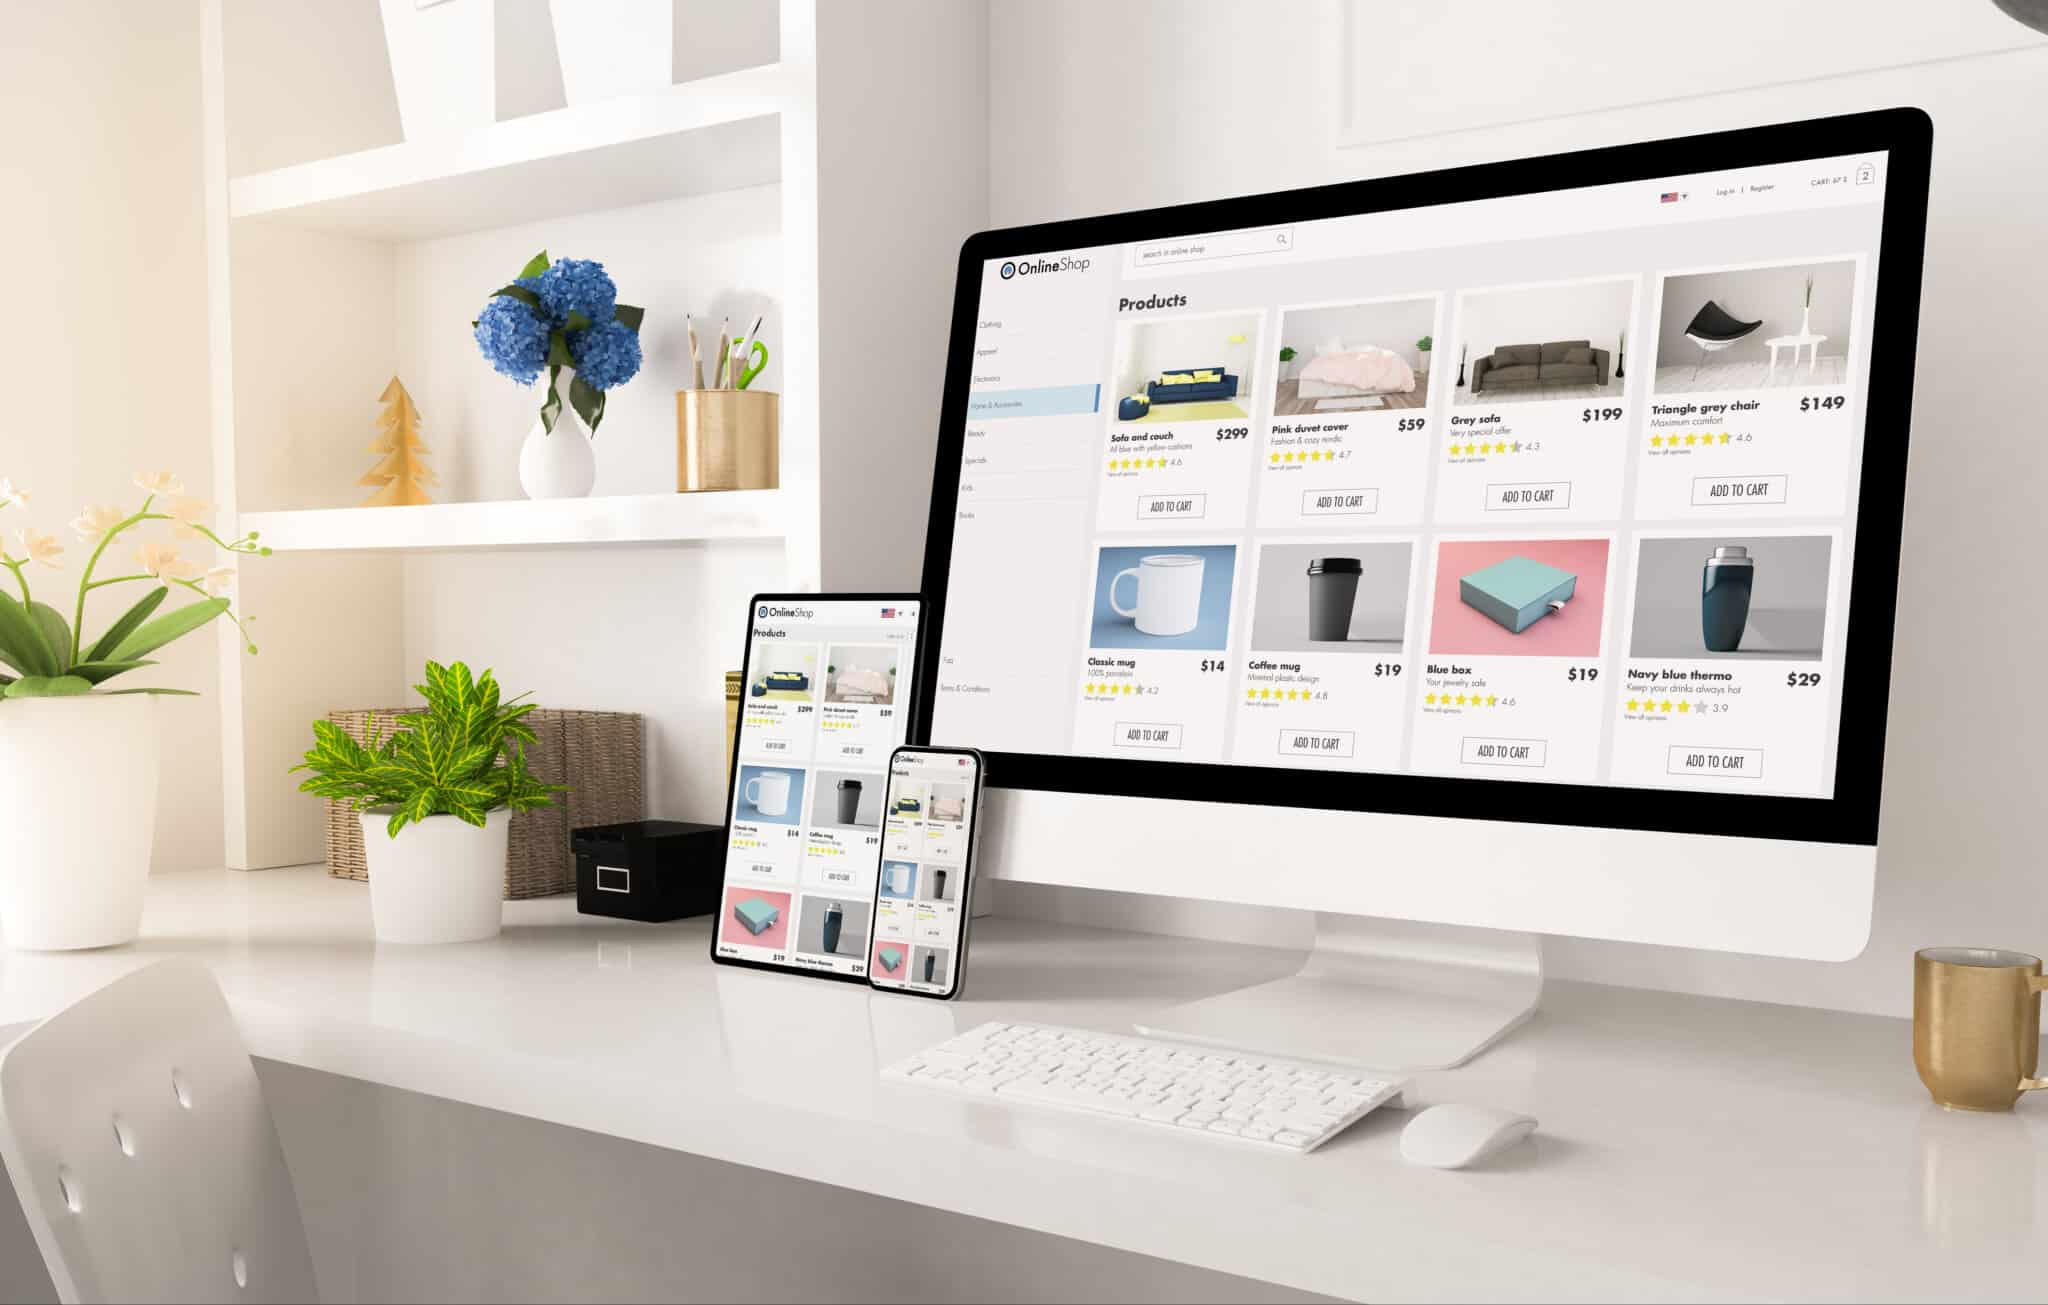 eCommerce shop with various items viewed across desktop, tablet, and mobile devices.